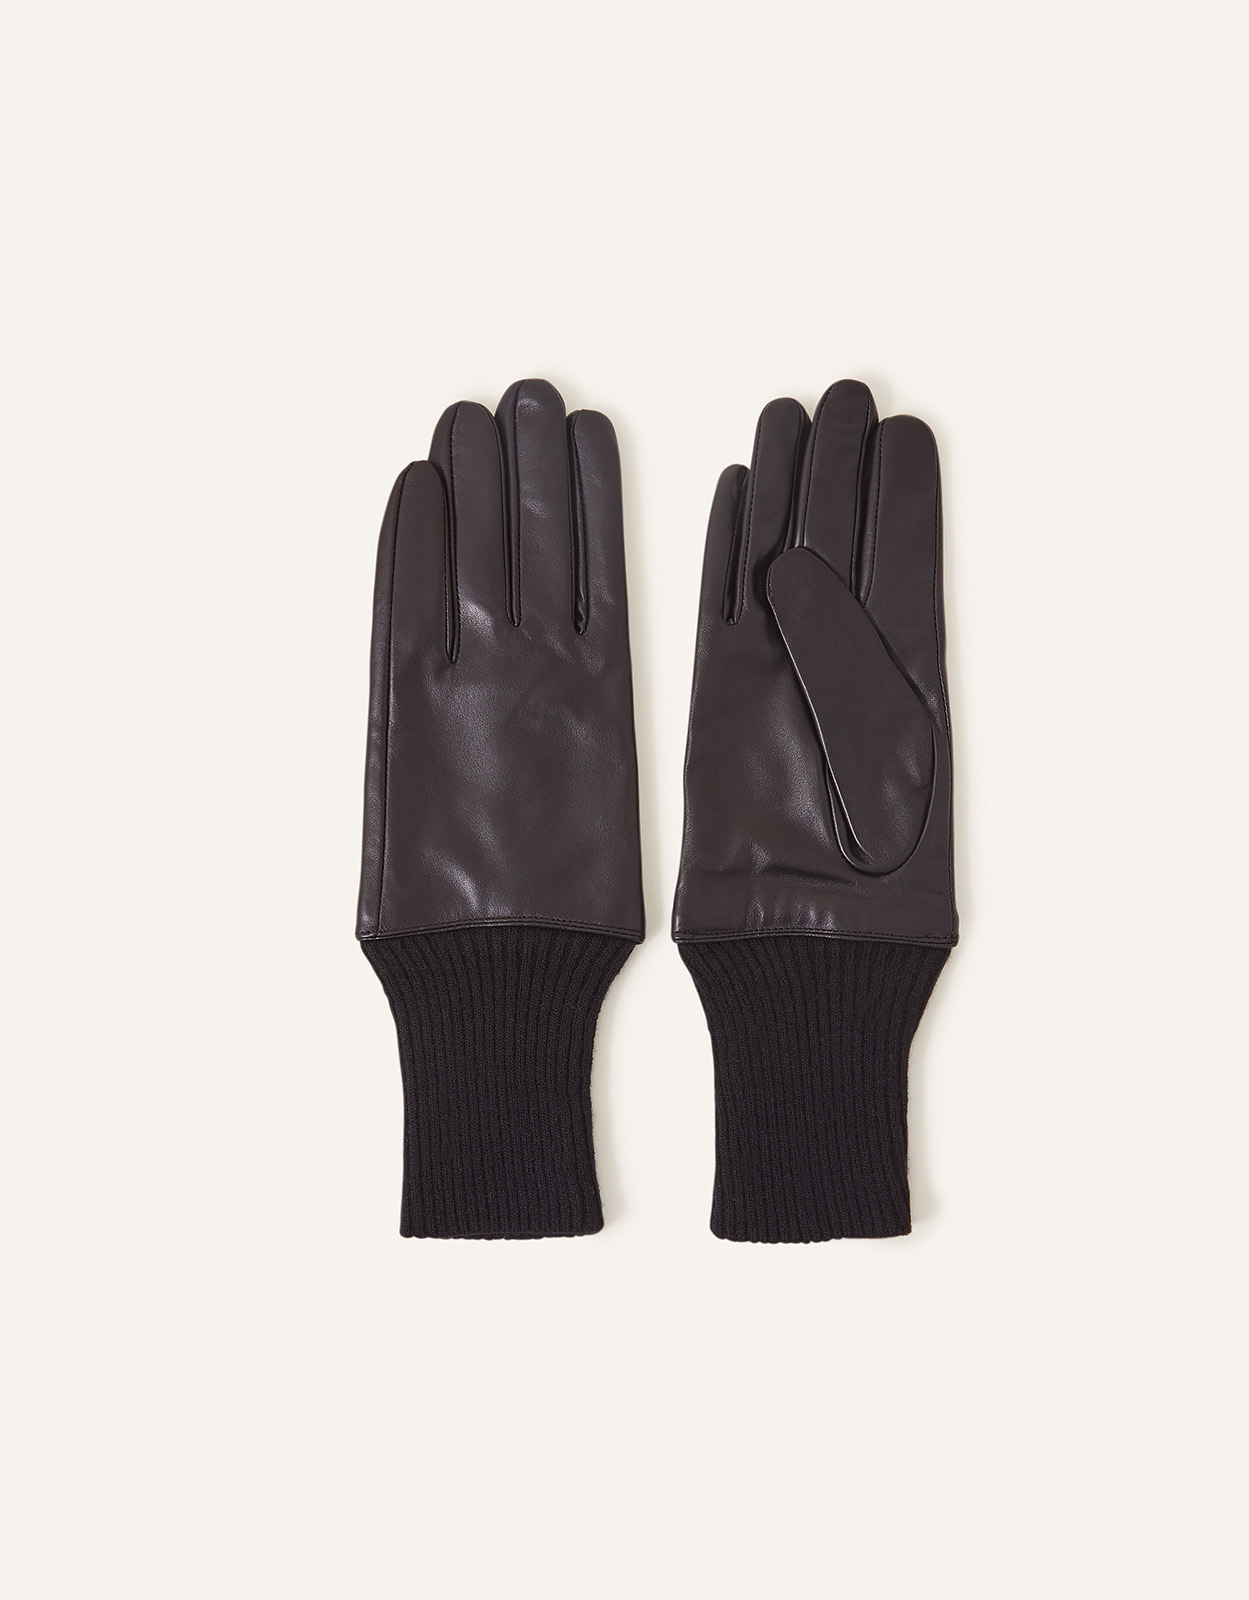 Accessorize Women's Leather Cuff Gloves Black, Size: One Size